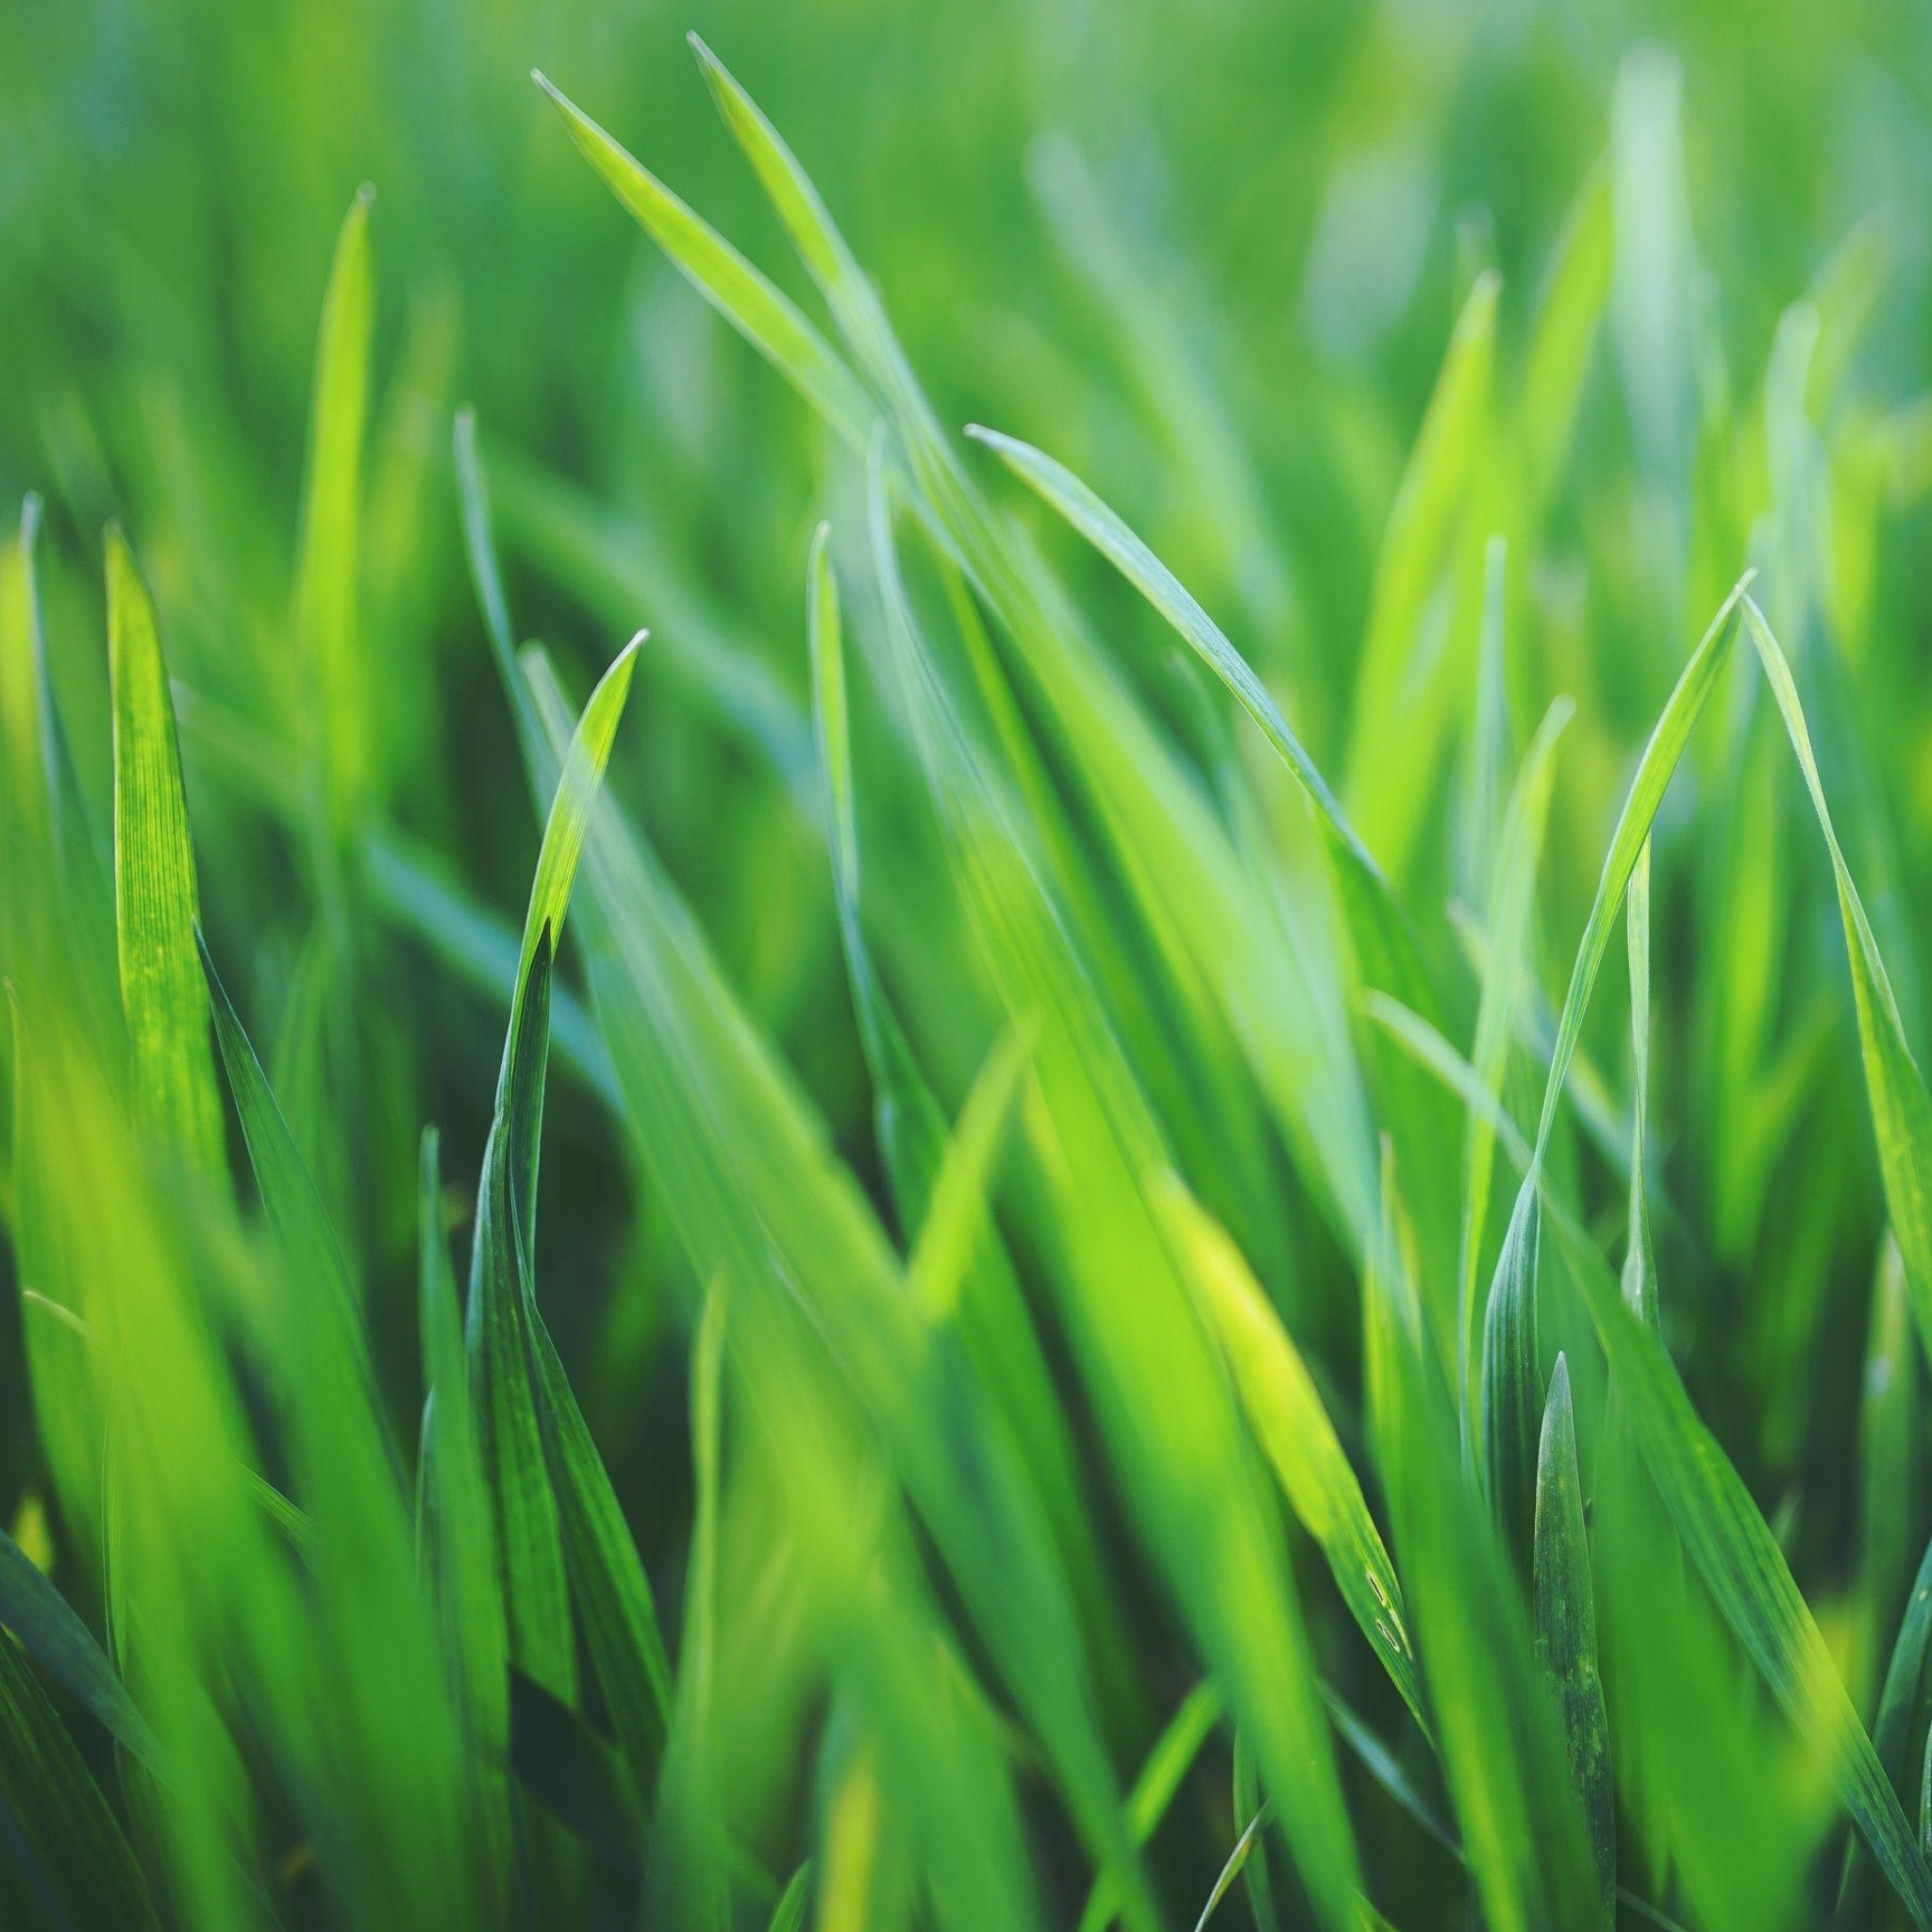 Apple wallpapers, Stunning grass, Nature's allure, Perfect backdrop, 2050x2050 HD Handy